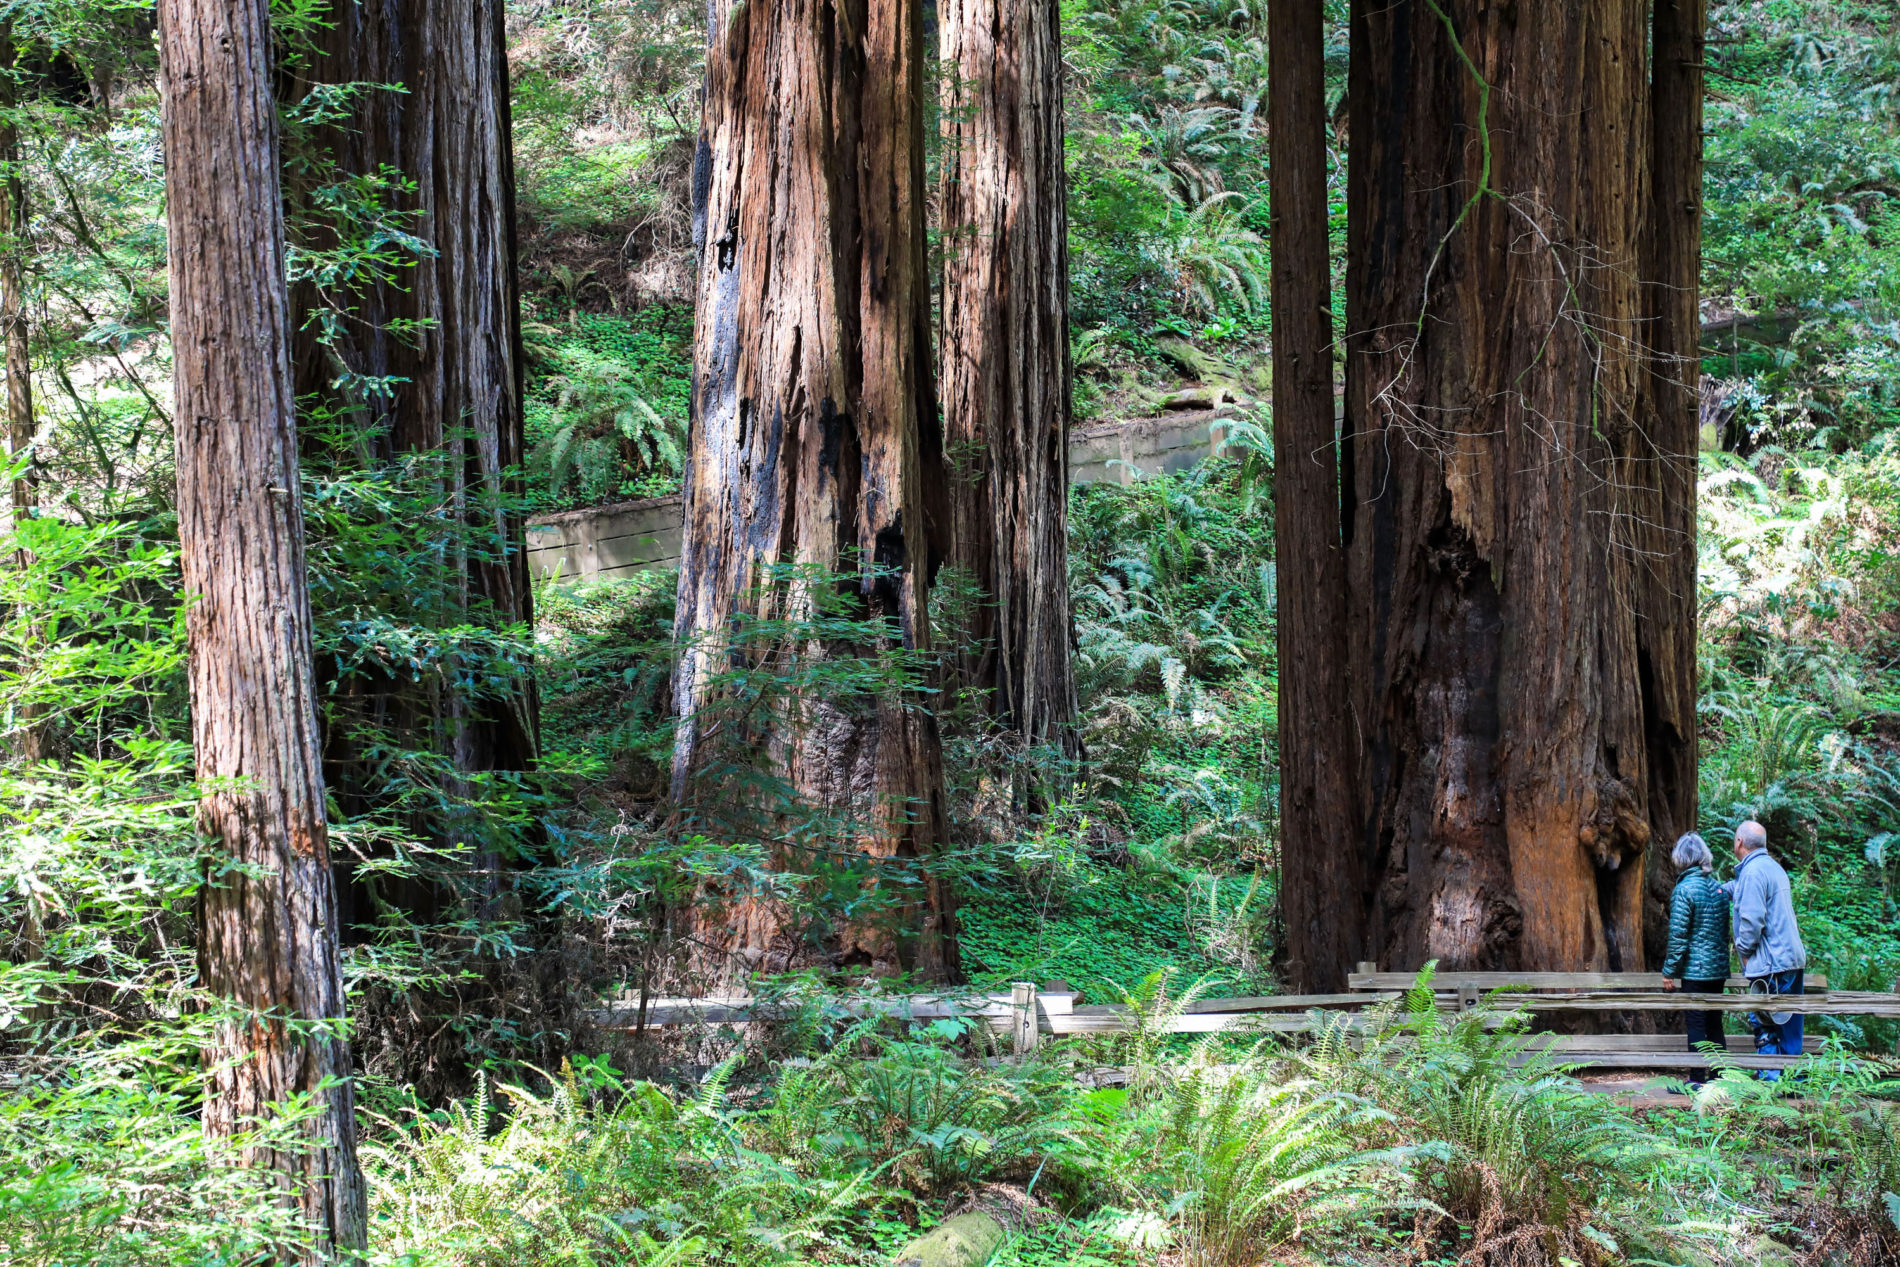 Visitors on the Redwood Creek Trail, pass within arms-length of giant old growth redwoods.